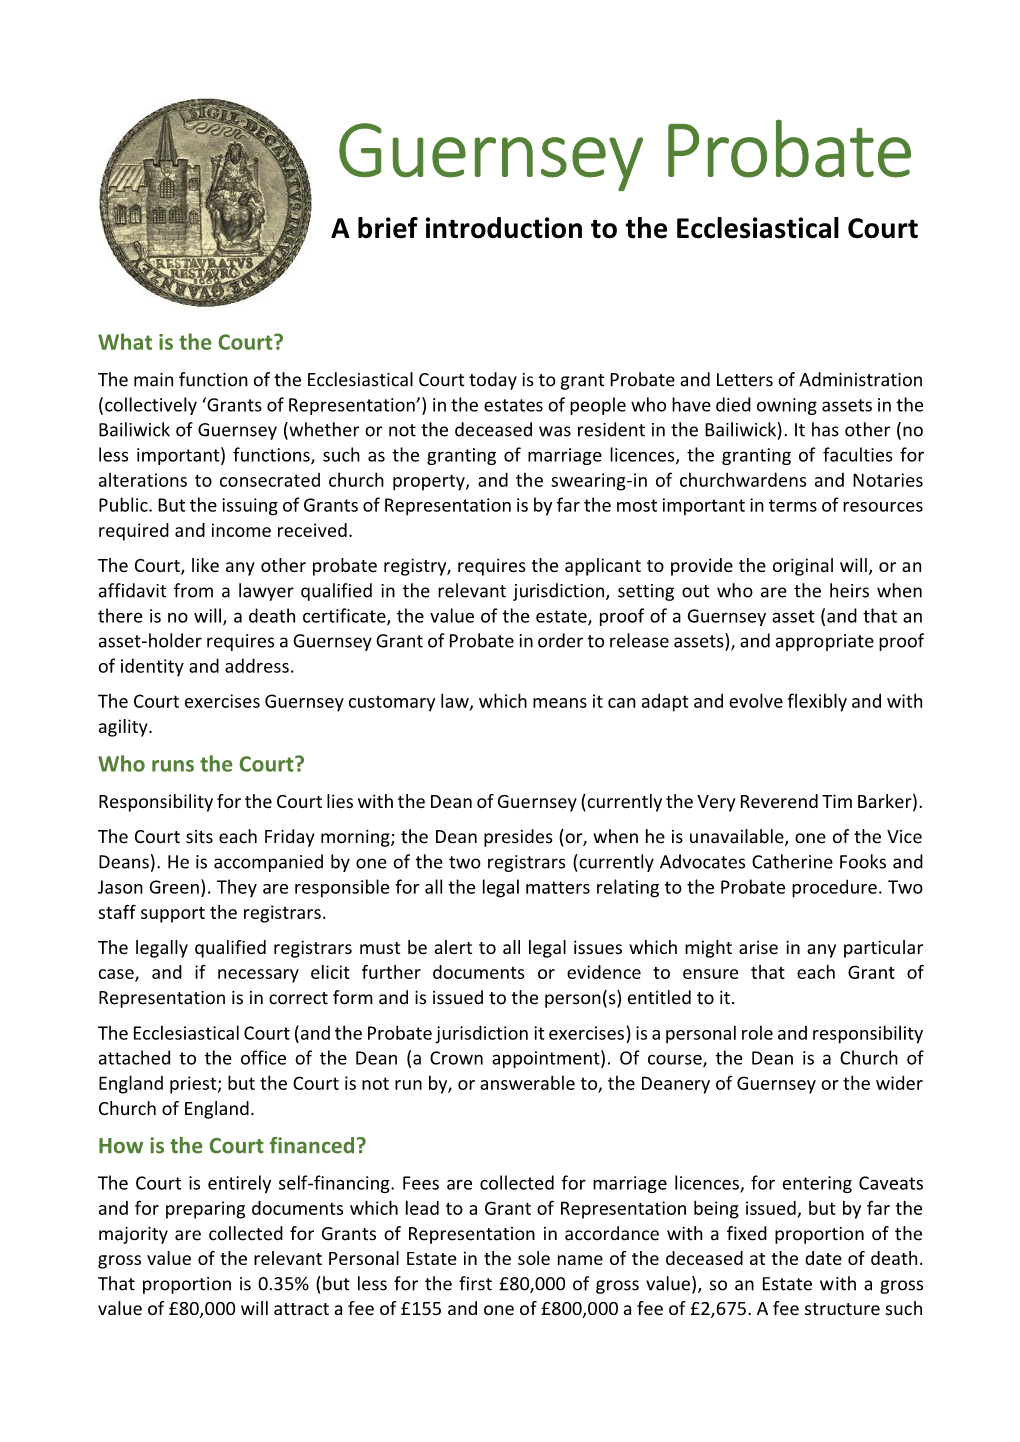 Guernsey Probate a Brief Introduction to the Ecclesiastical Court